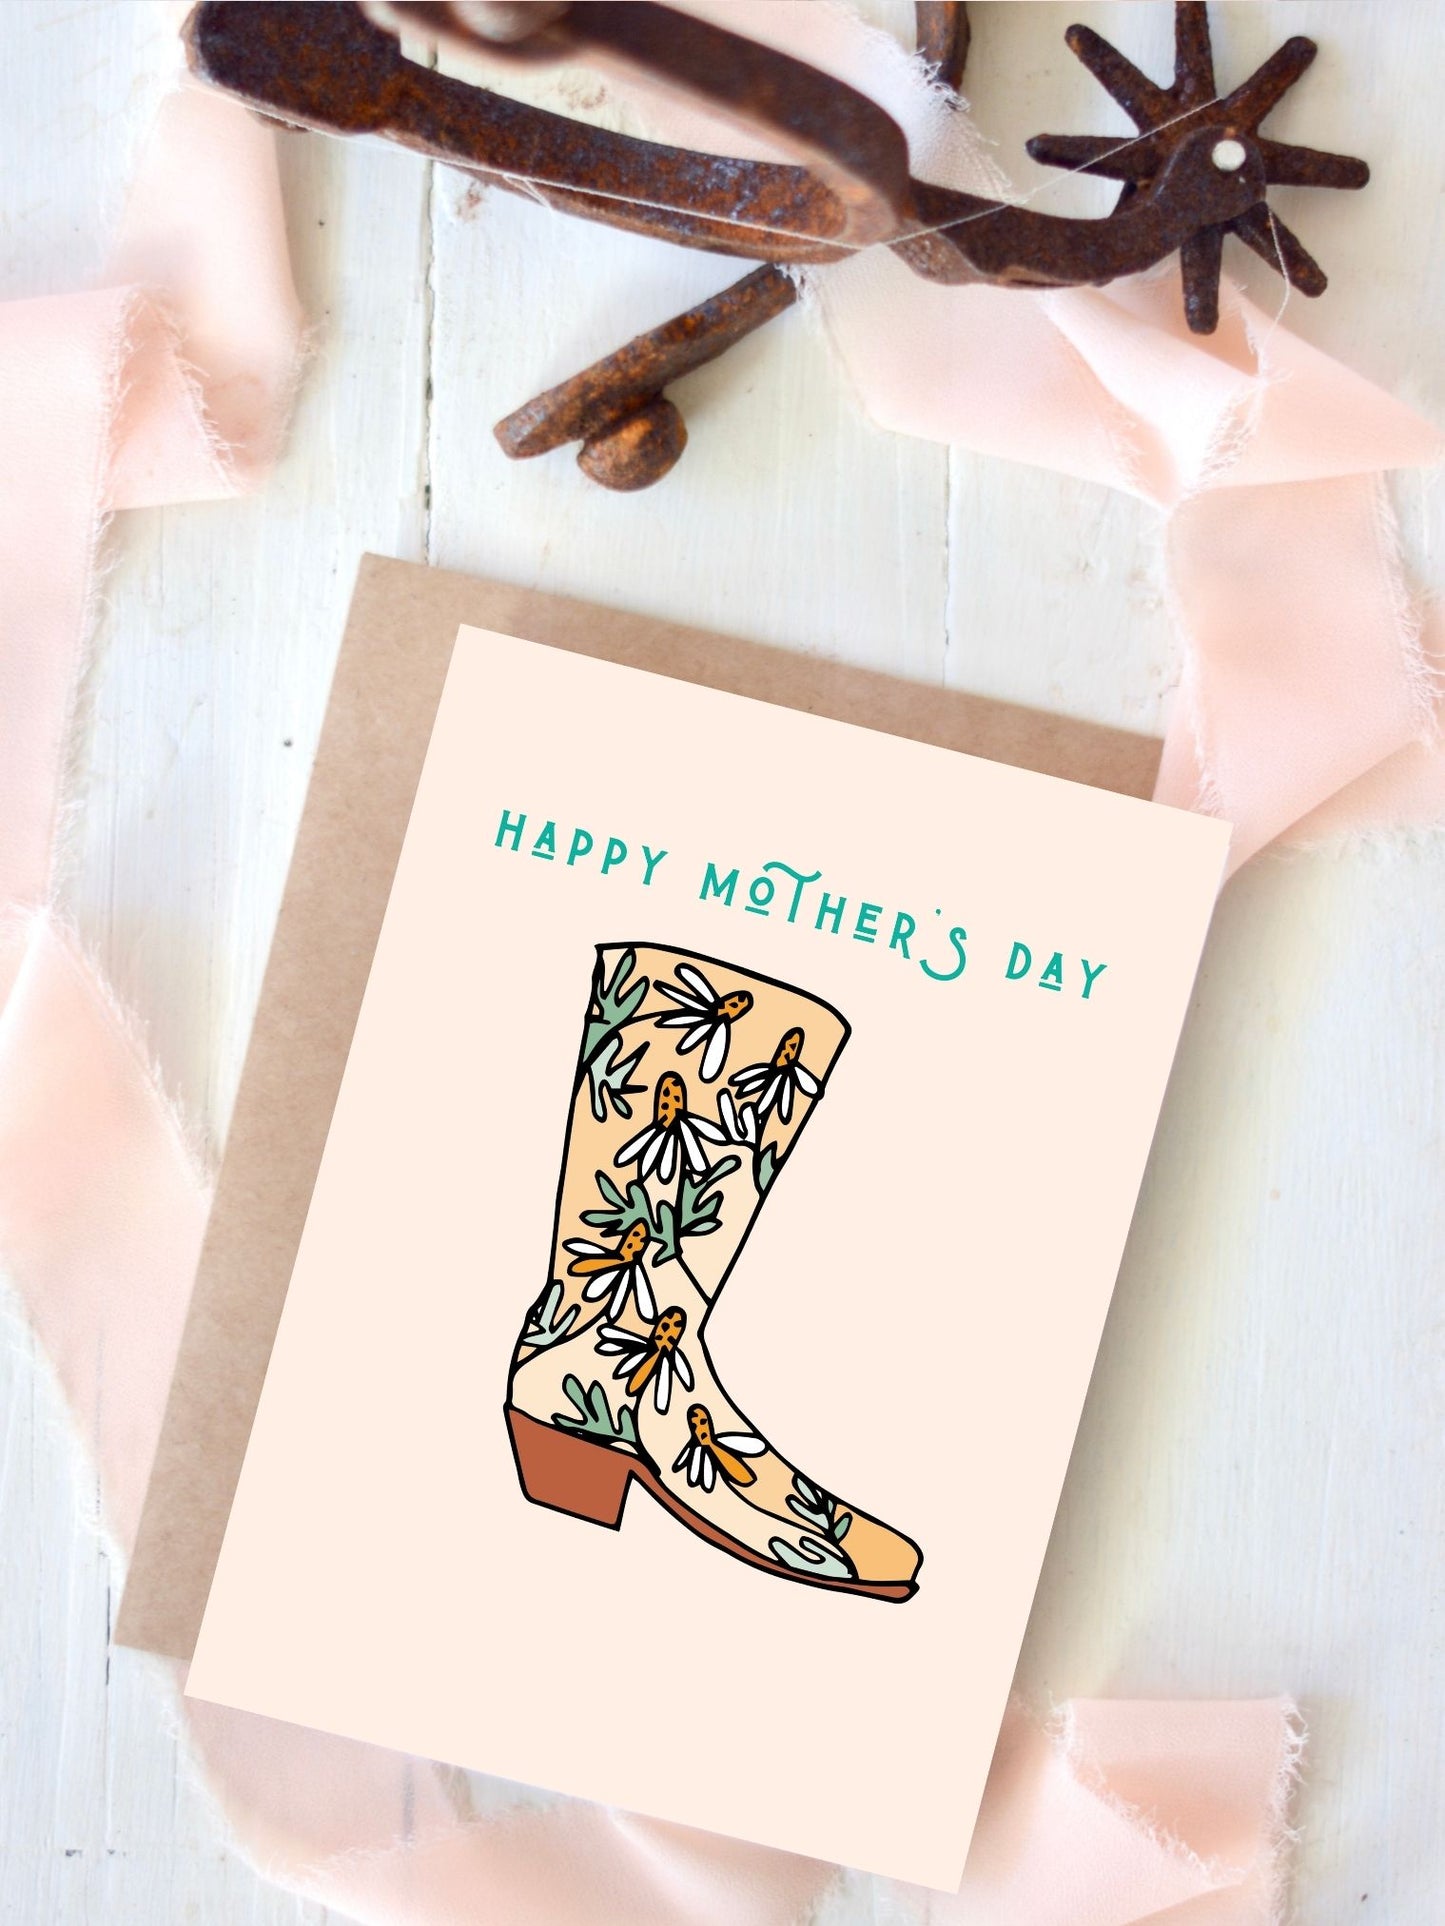 Happy Mother's Day Cowboy Boot Floral Card